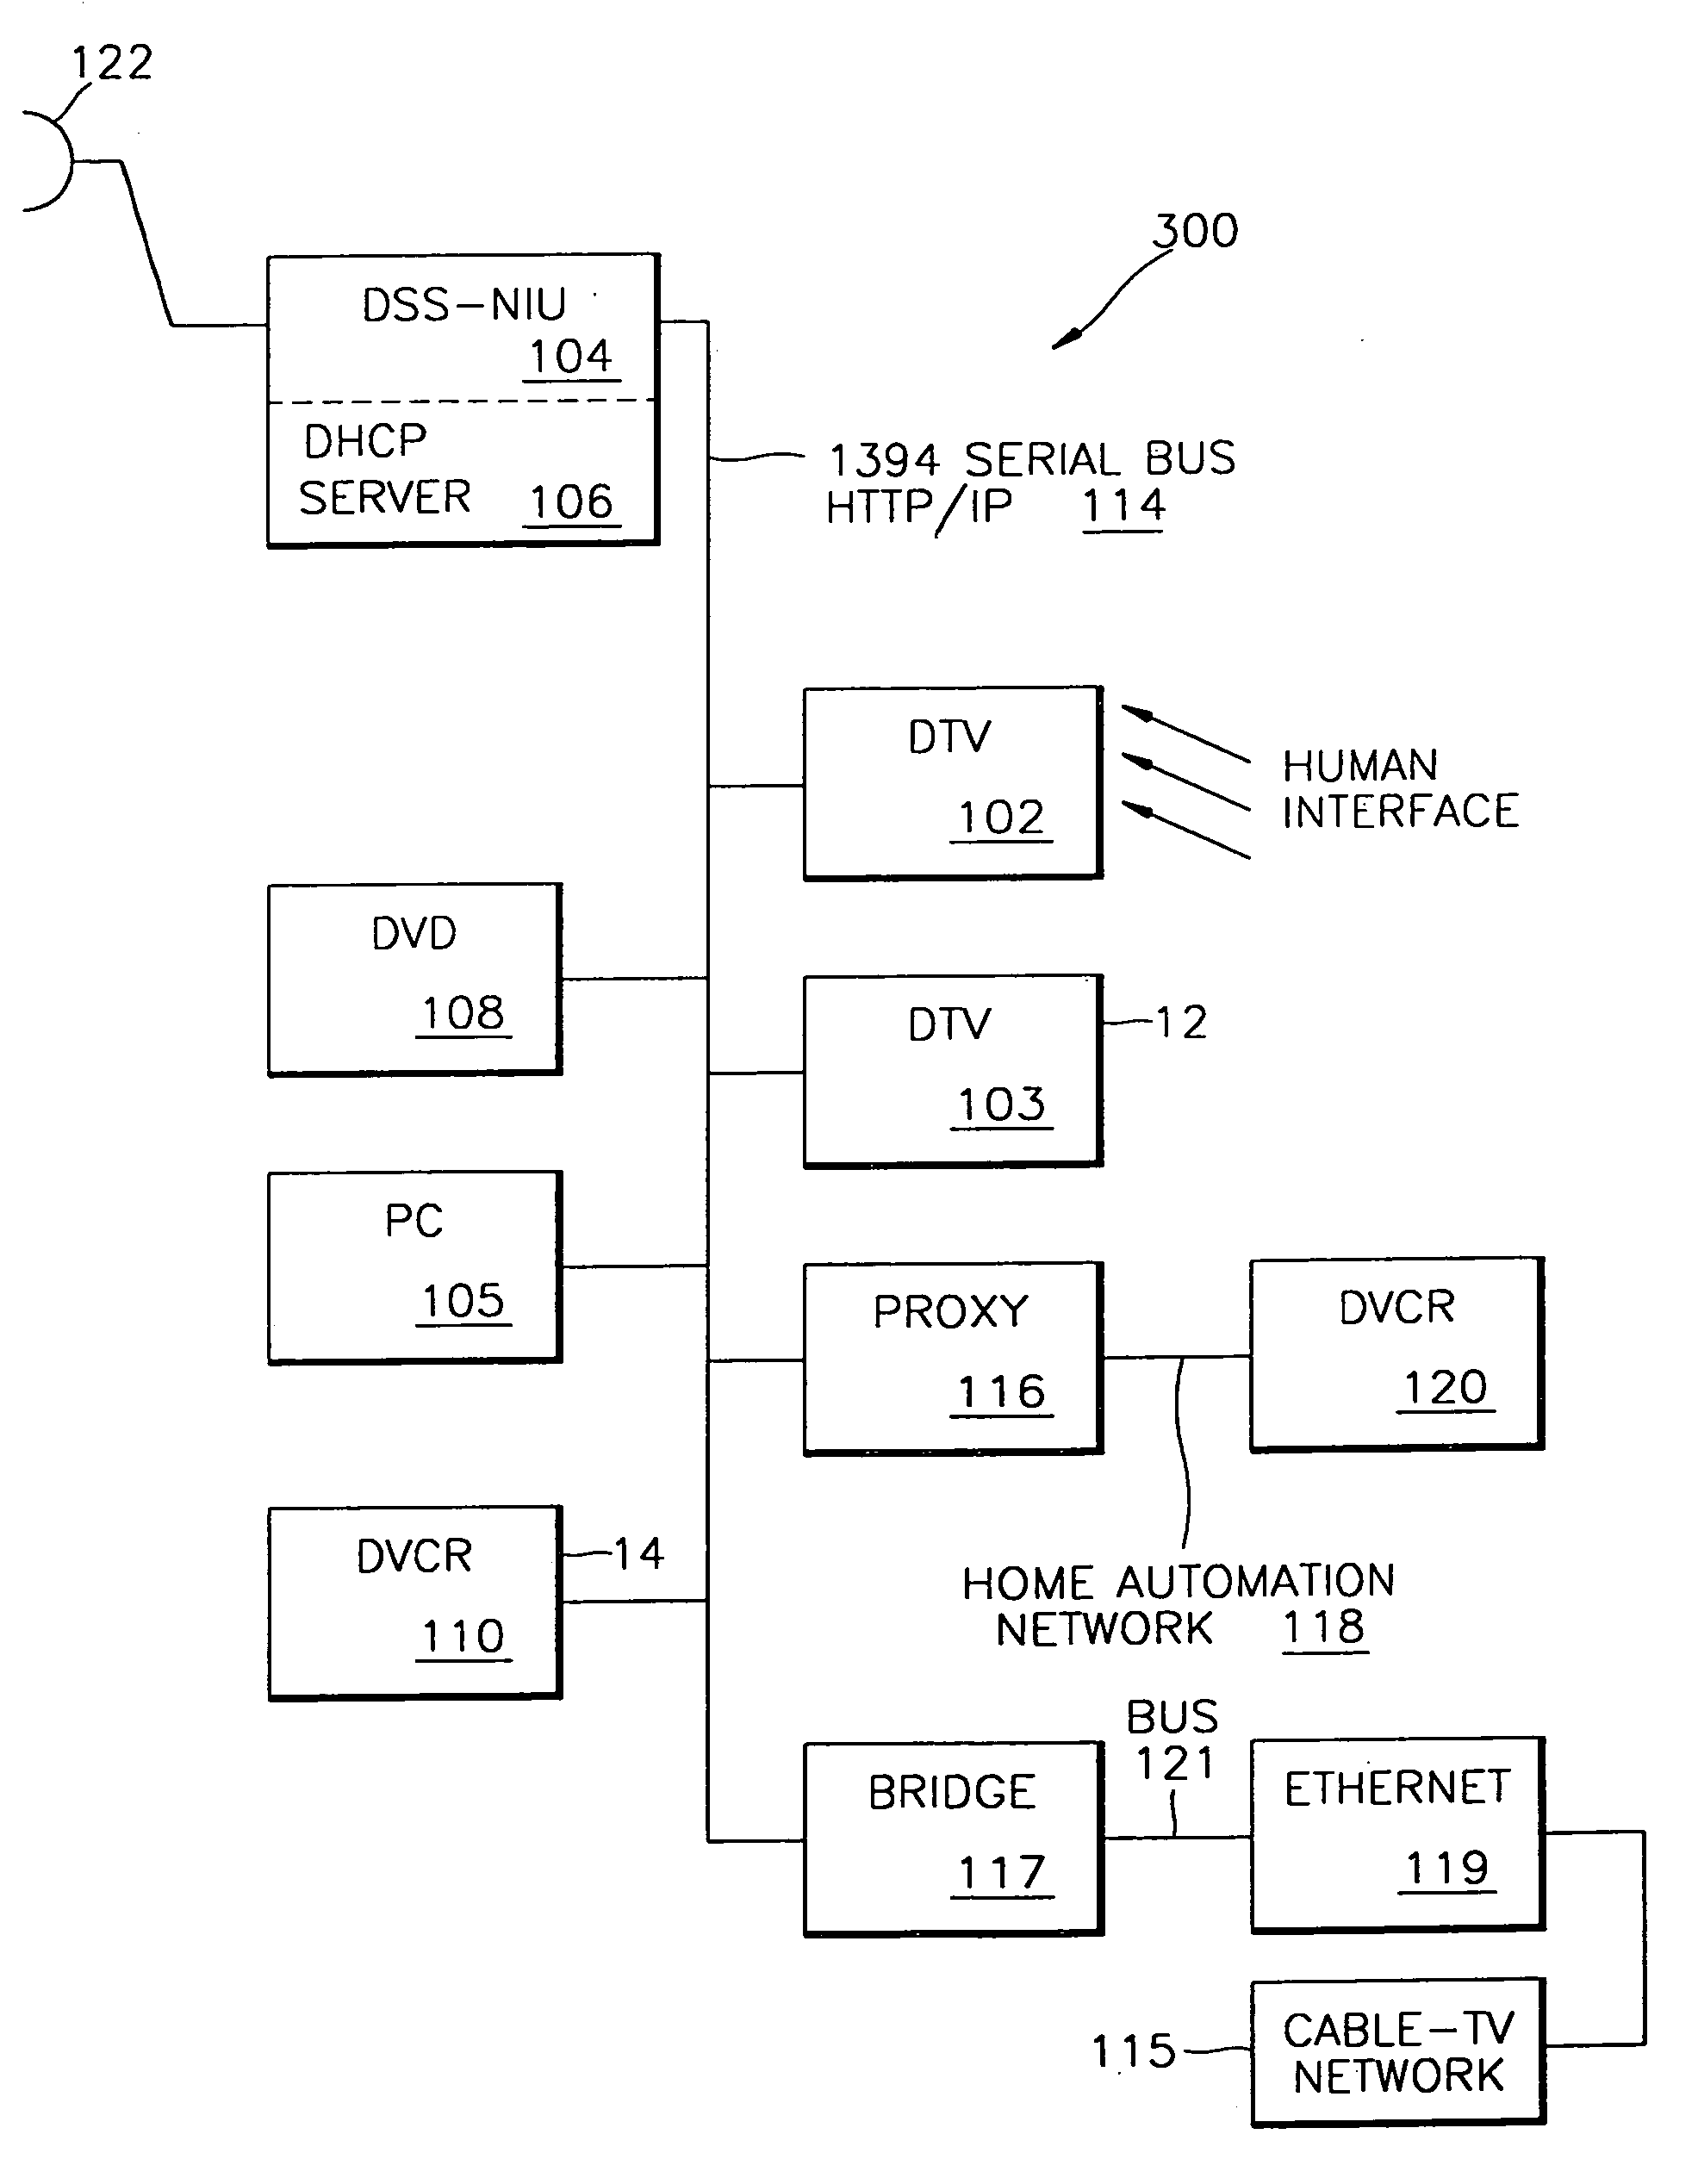 Device communication and control in a home network connected to an external network